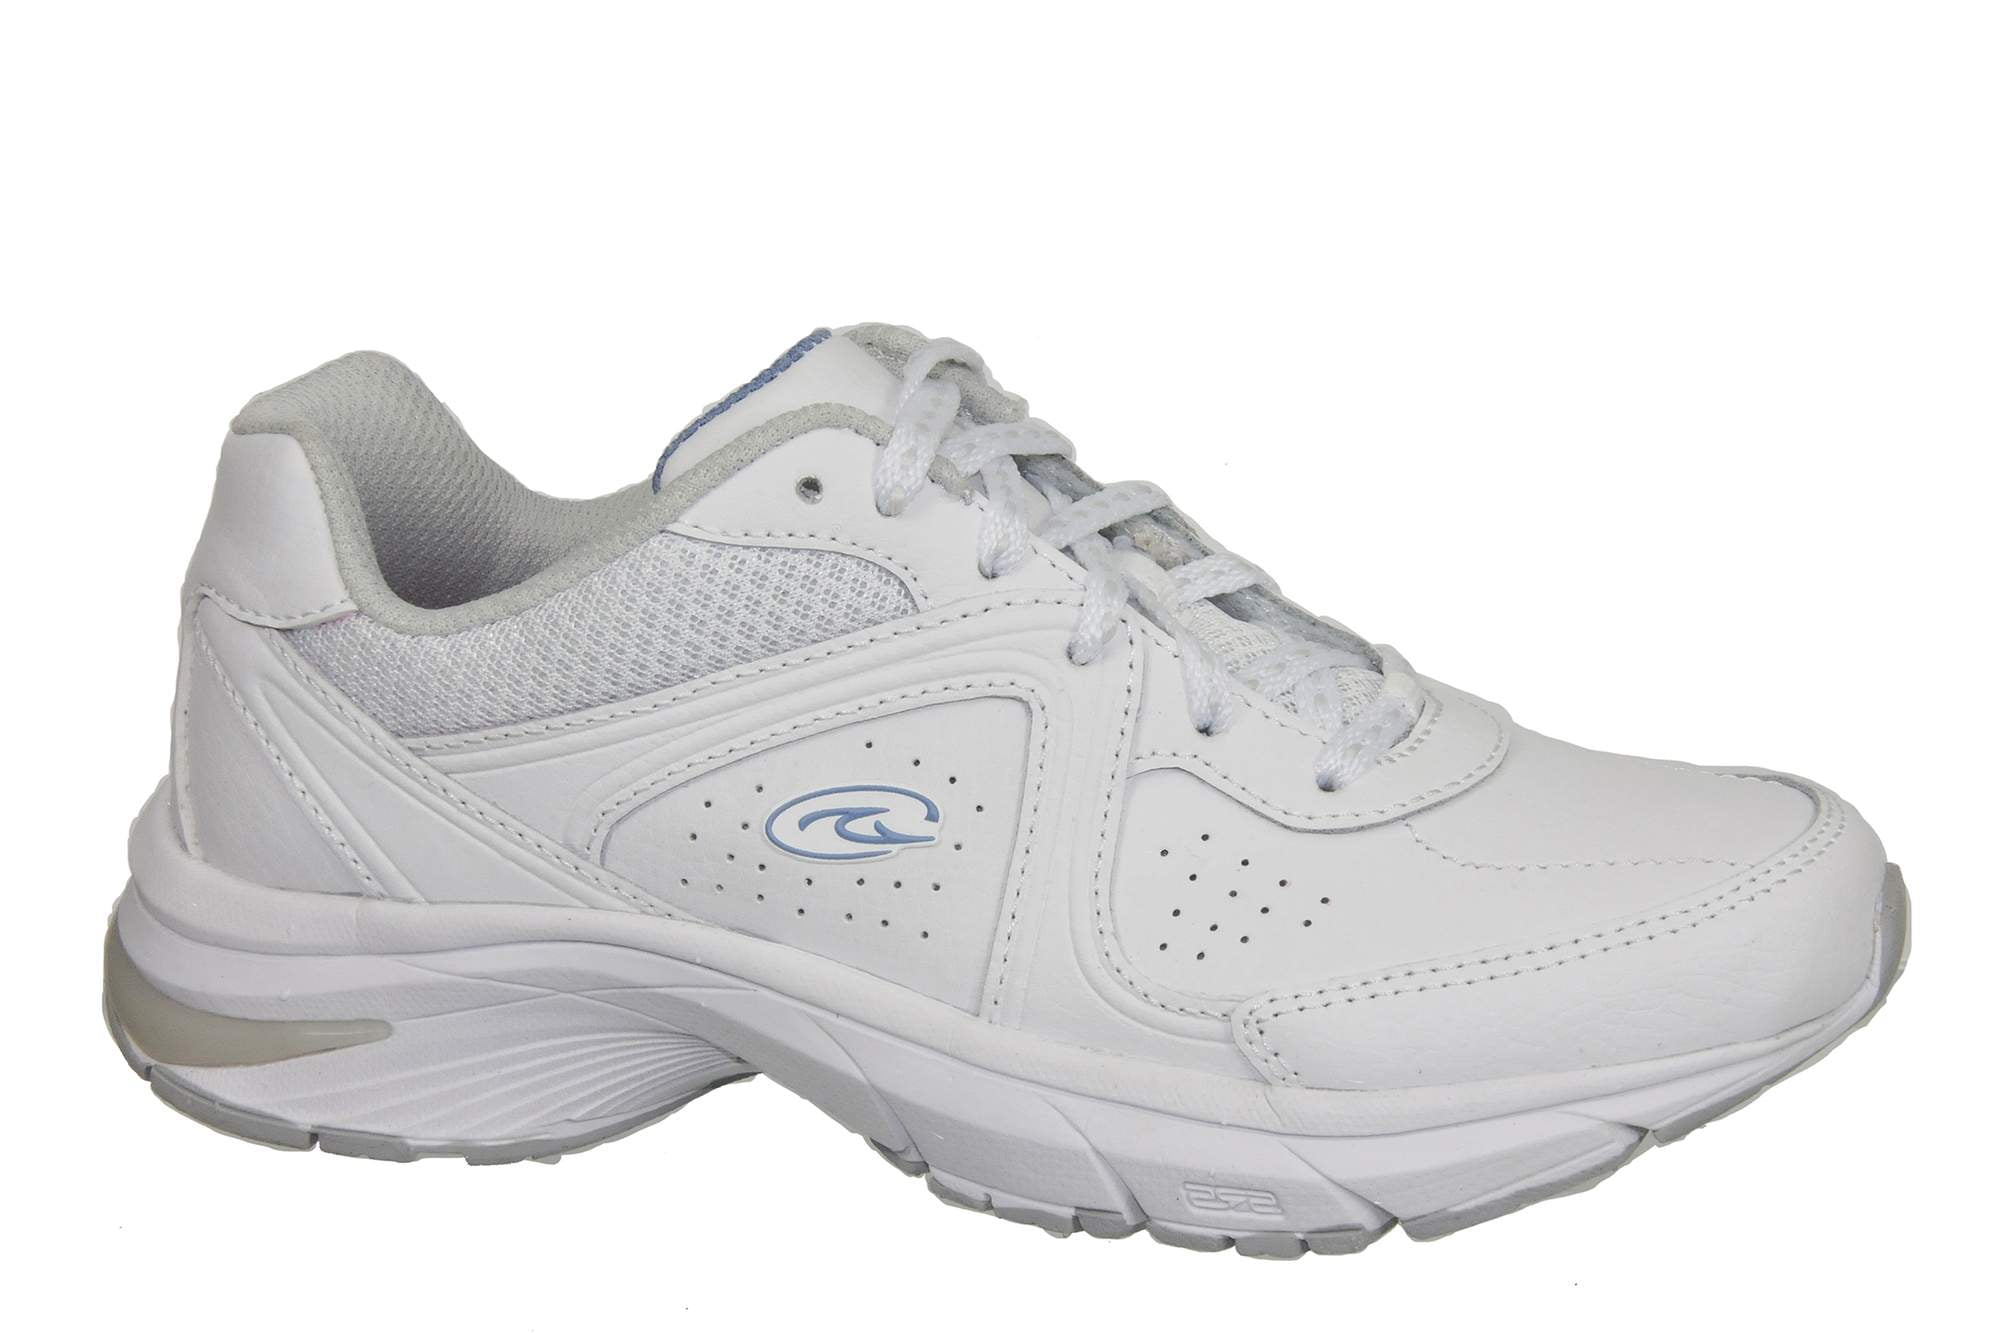 dr scholl's white tennis shoes